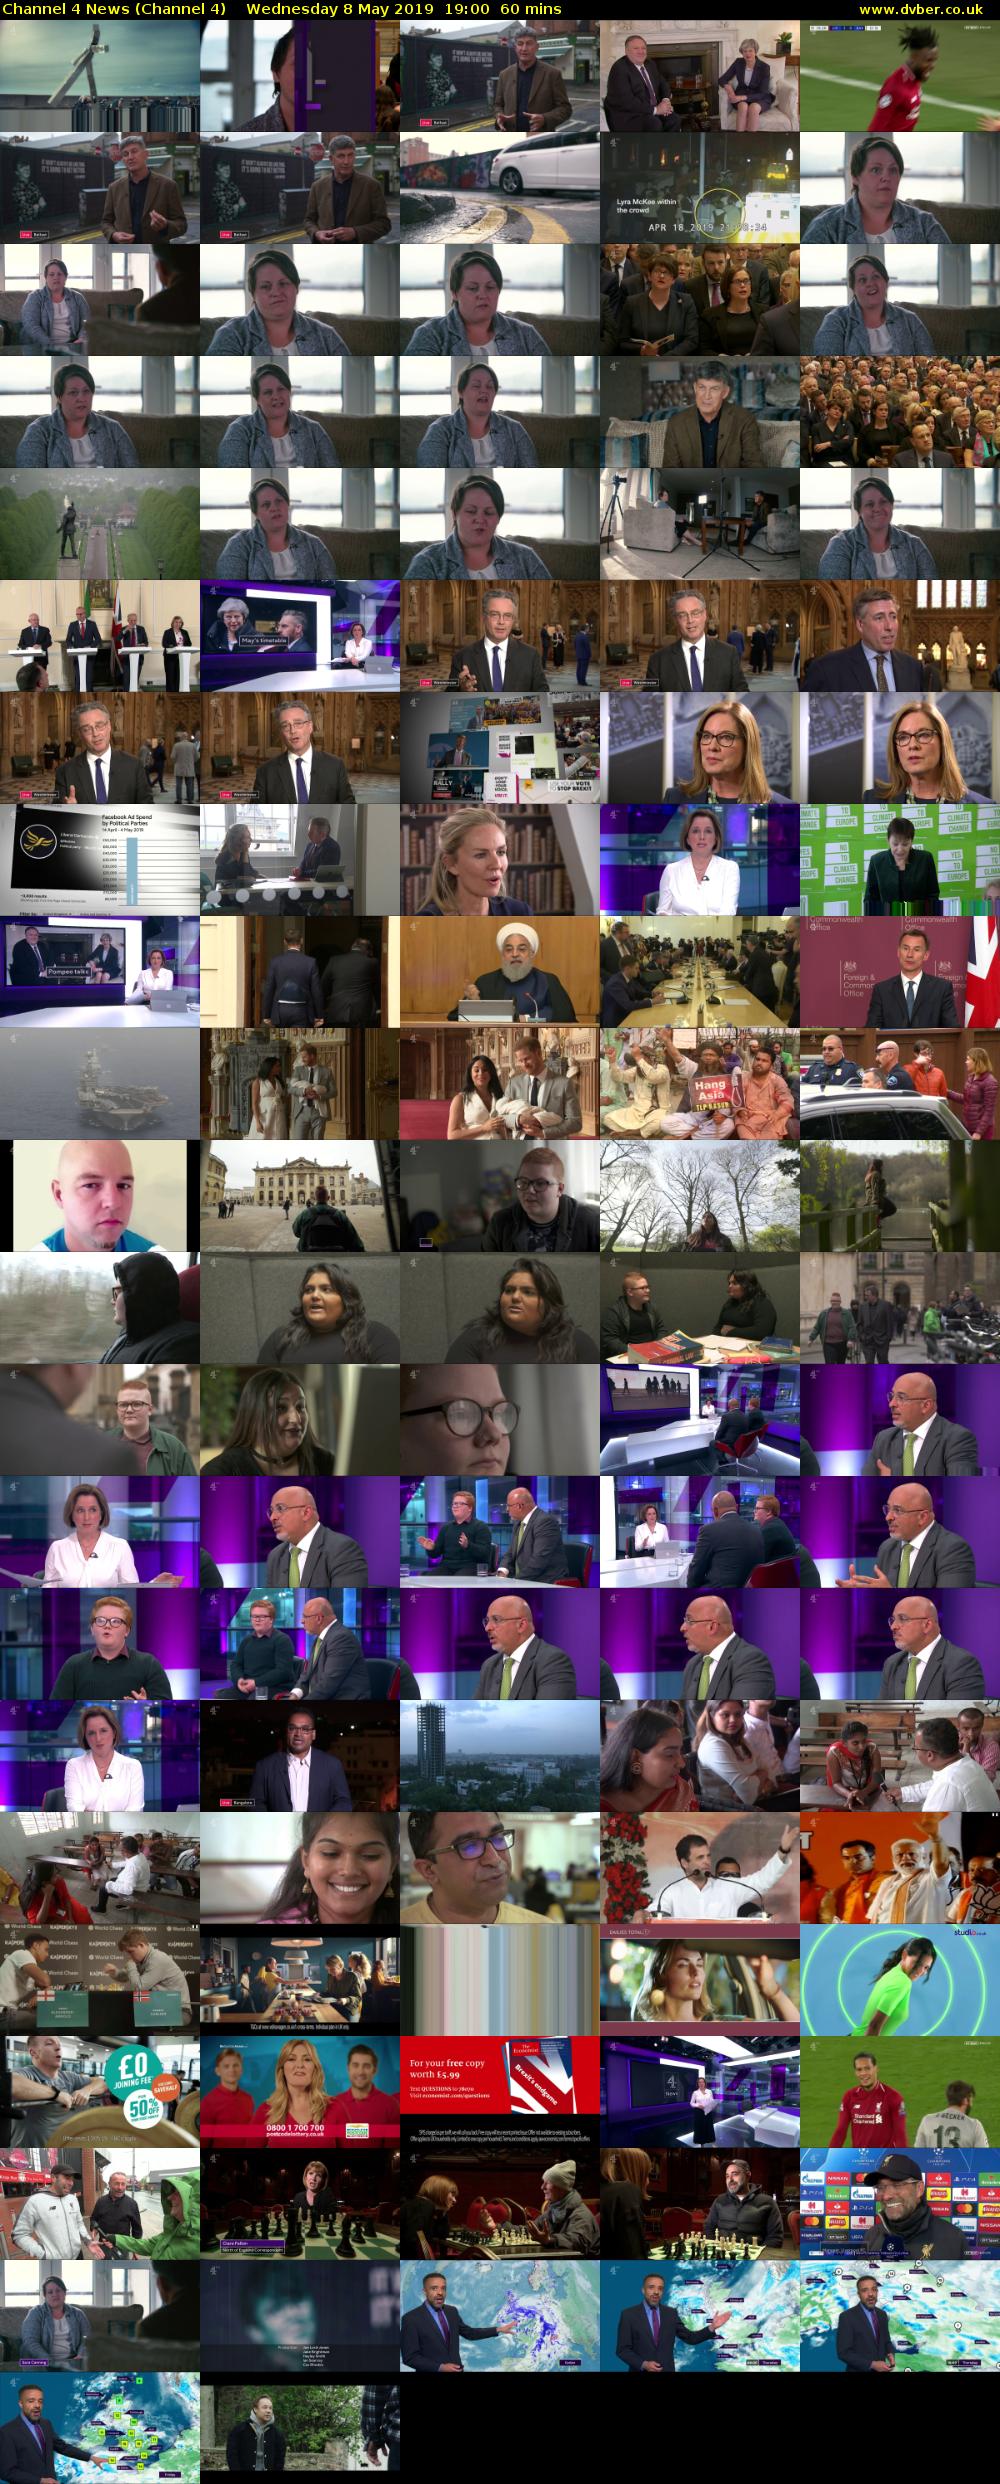 Channel 4 News (Channel 4) Wednesday 8 May 2019 19:00 - 20:00